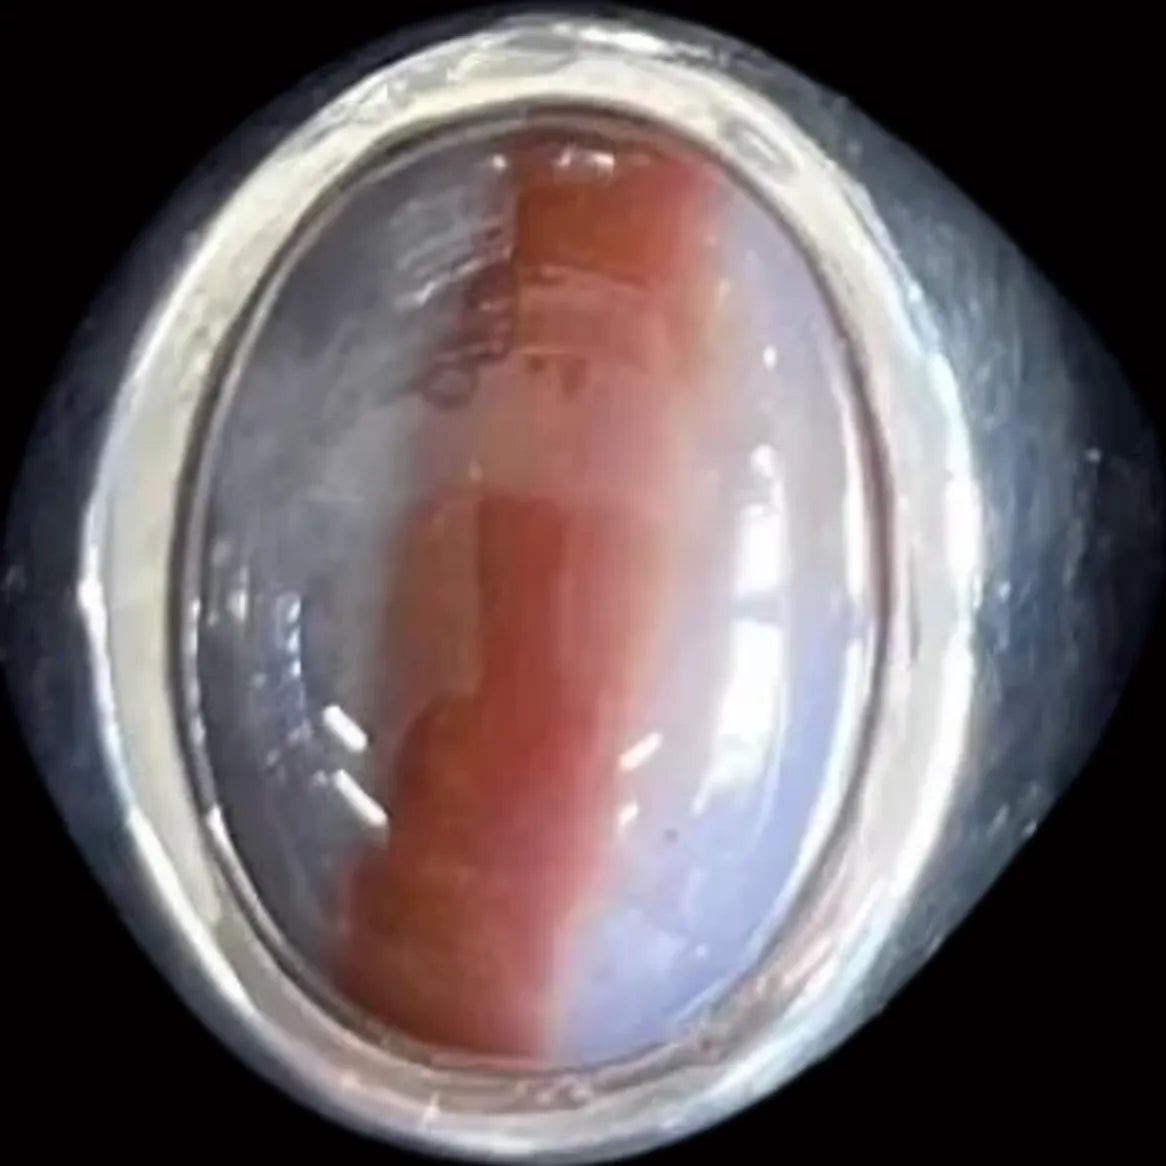 1998 KY Agate White/Blue/Red/Grey Oval Silver Ring